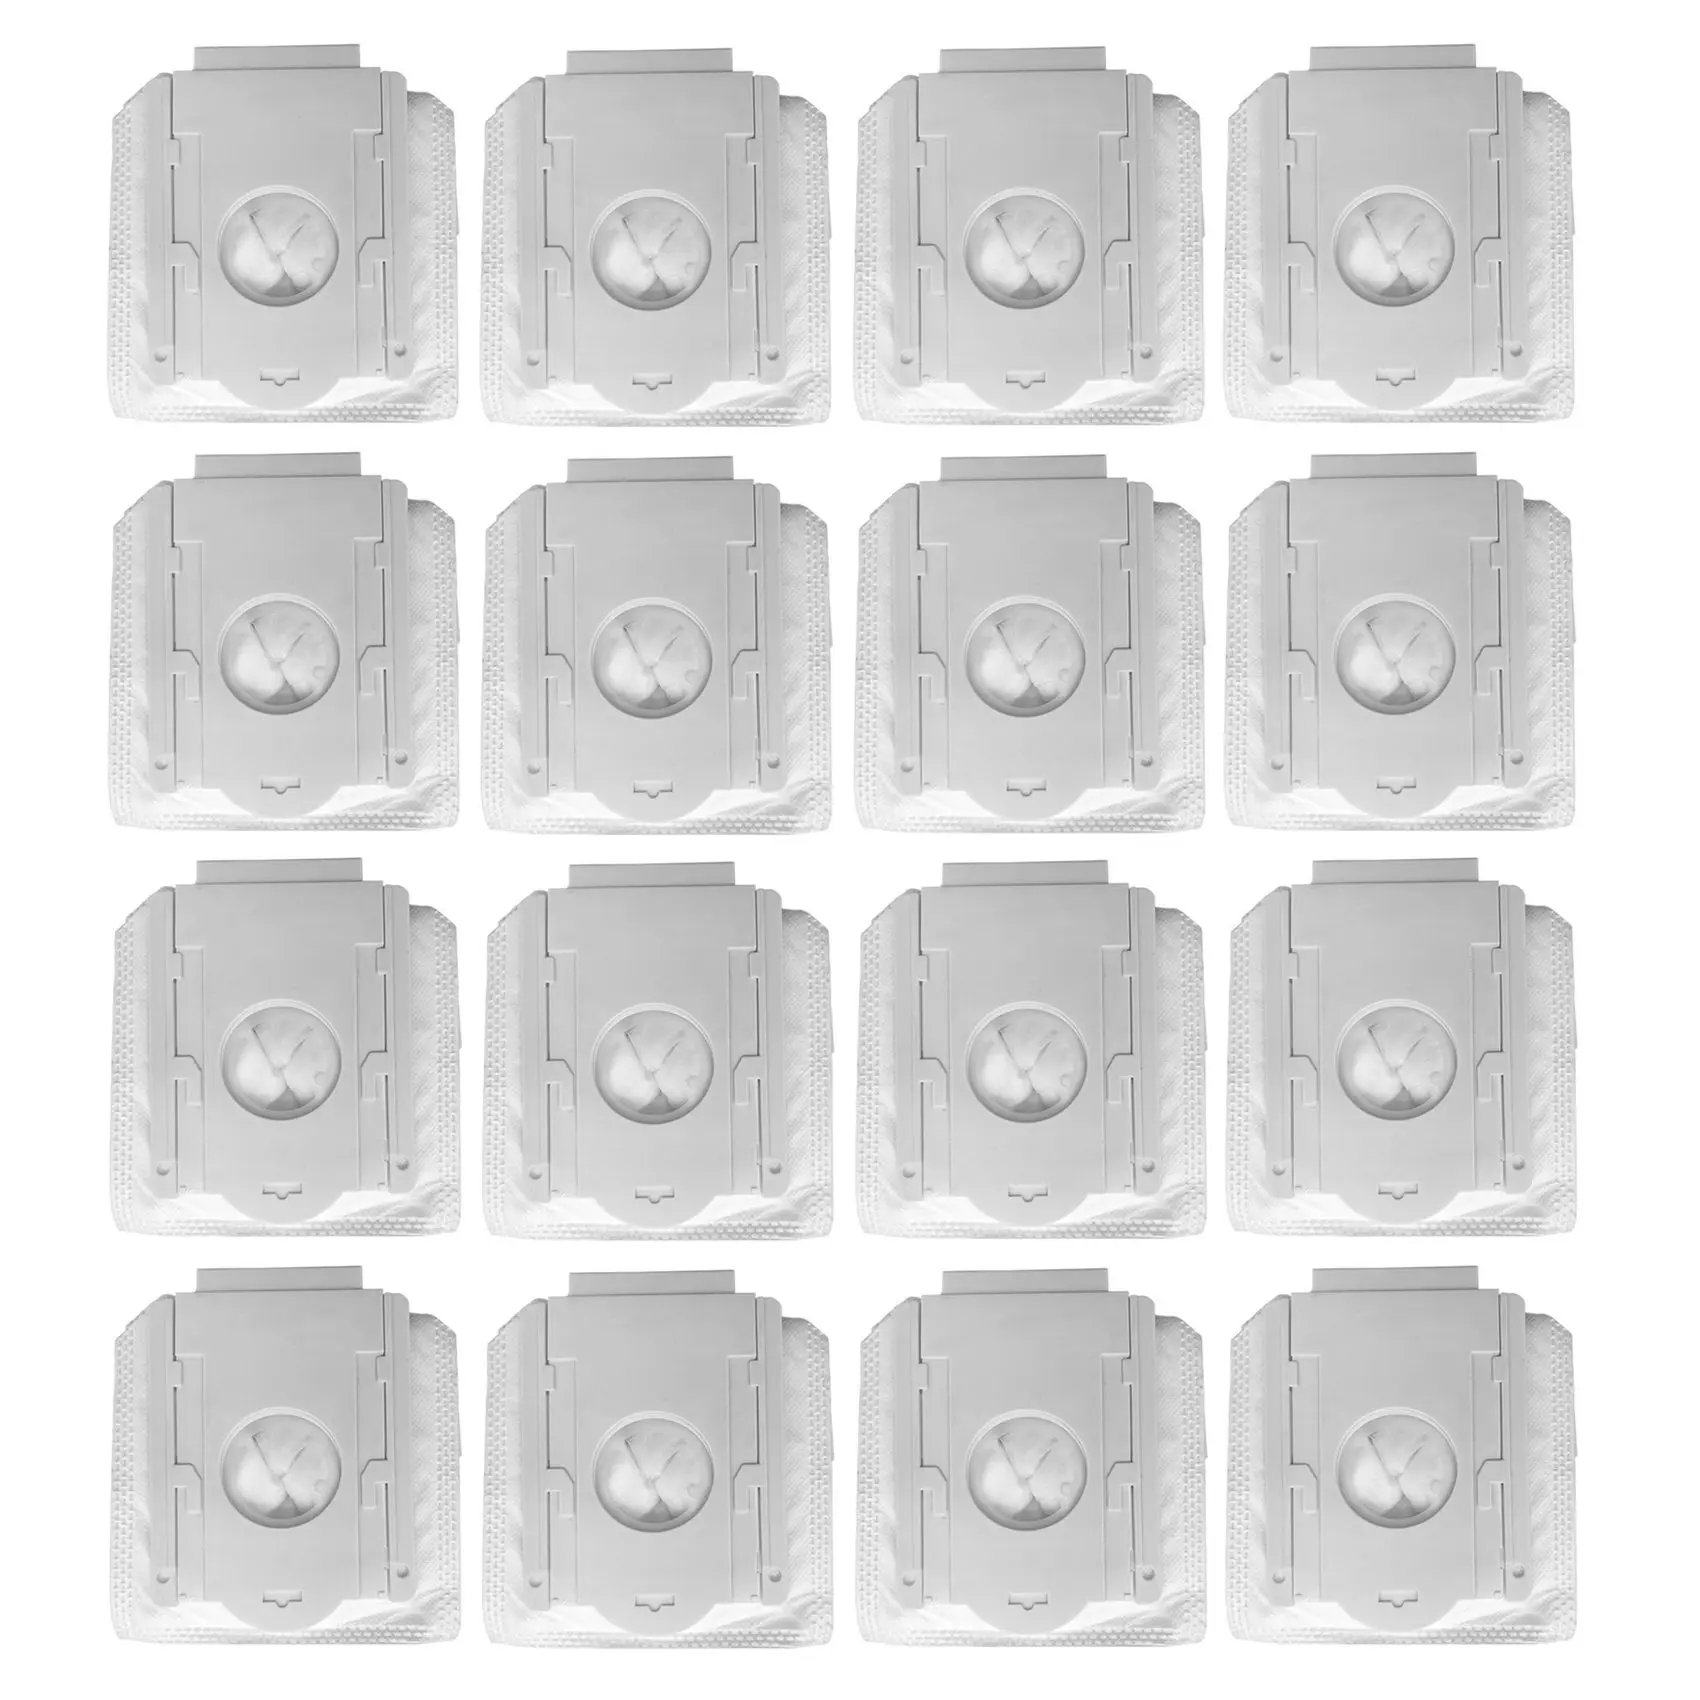 

16Pcs Vacuum Cleaner Dust Filter Bags Fits for SAMSUNG VCA-ADB90 Dust Bags for Jet Series Vacuums Clean Station Base